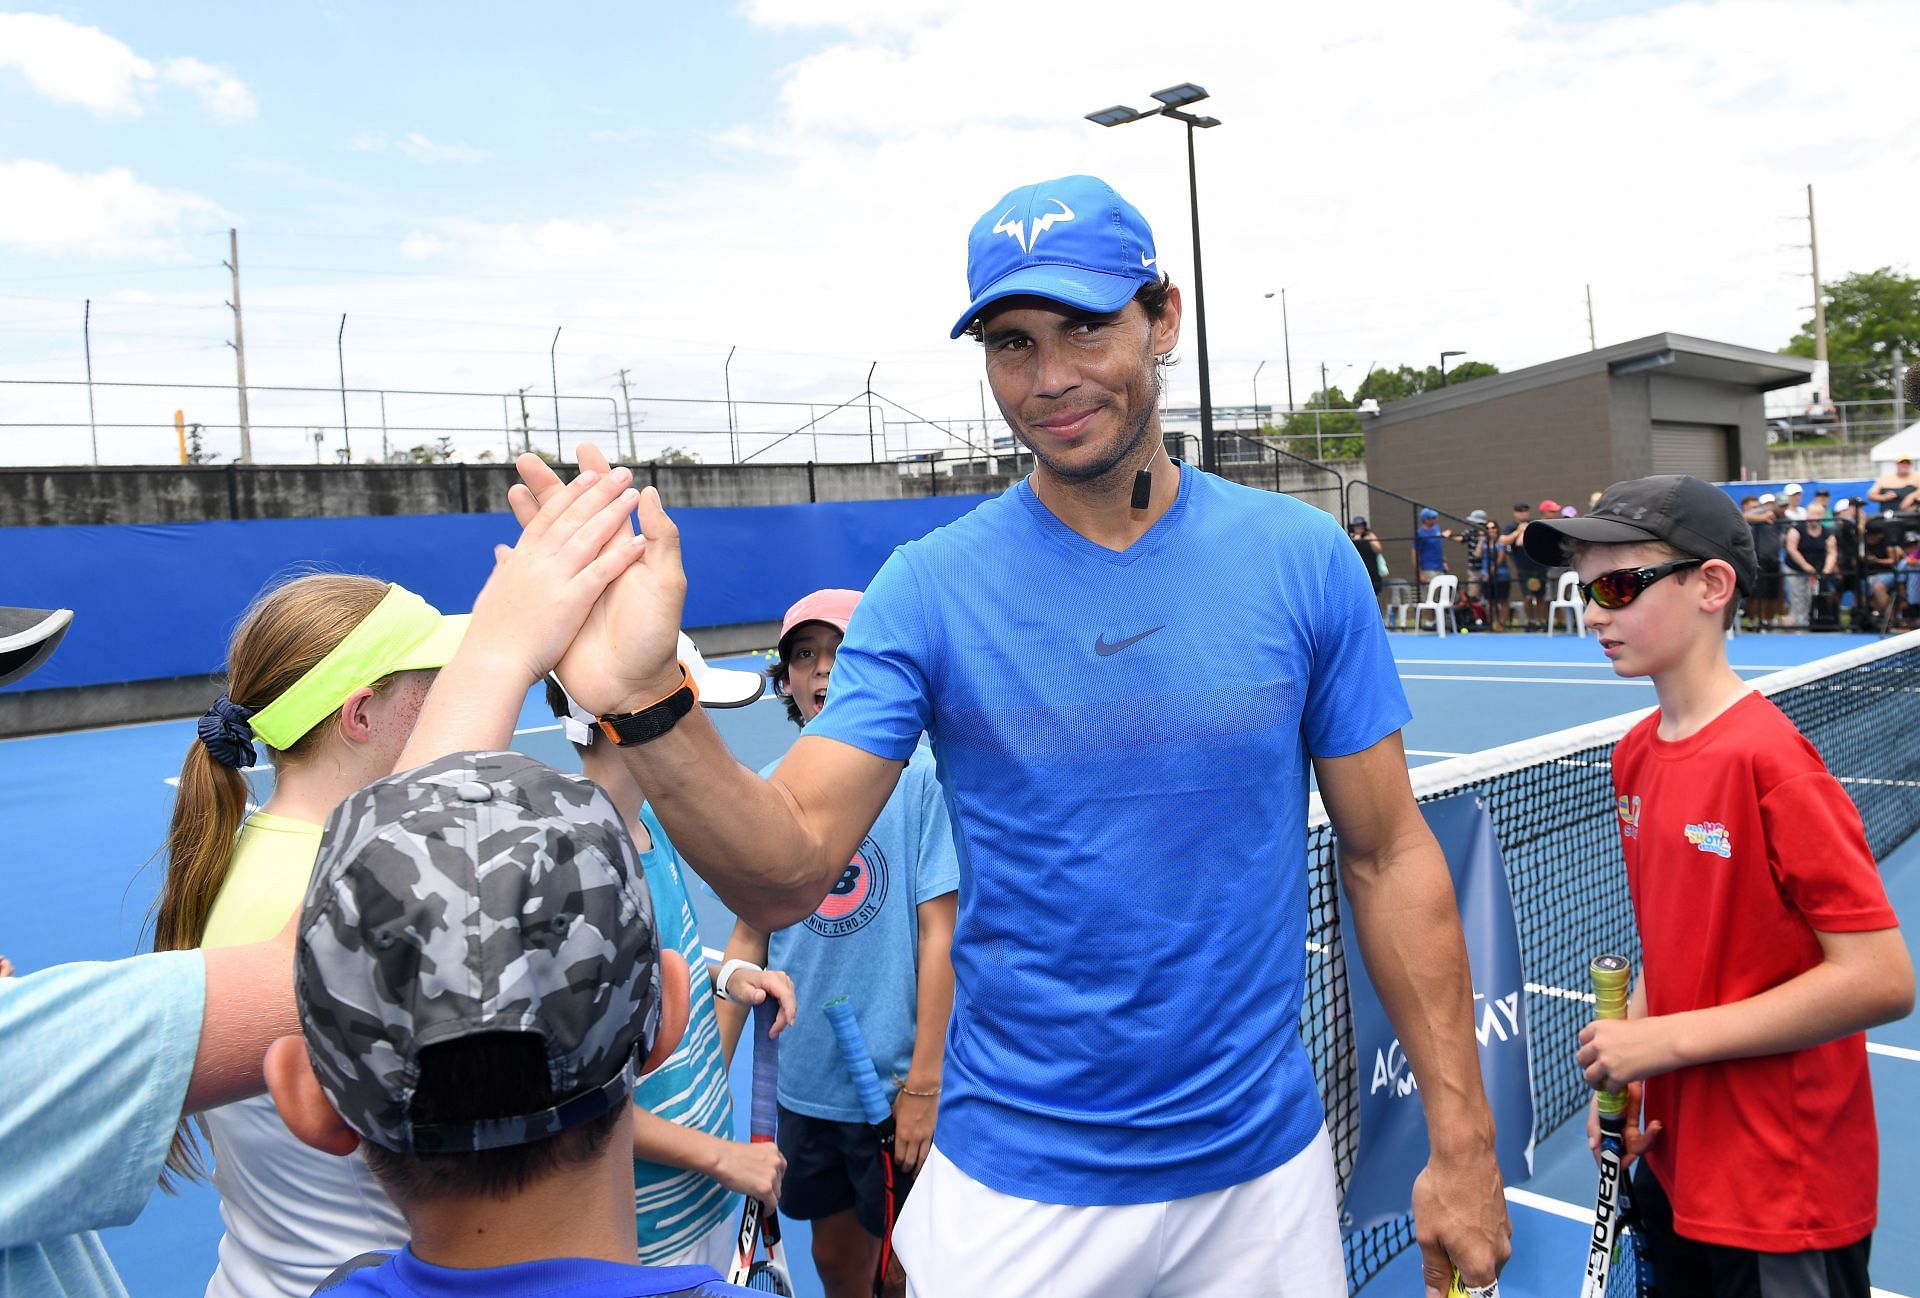 Rafael Nadal invited winners from the Tomas Cup in Japan for a week at his tennis academy